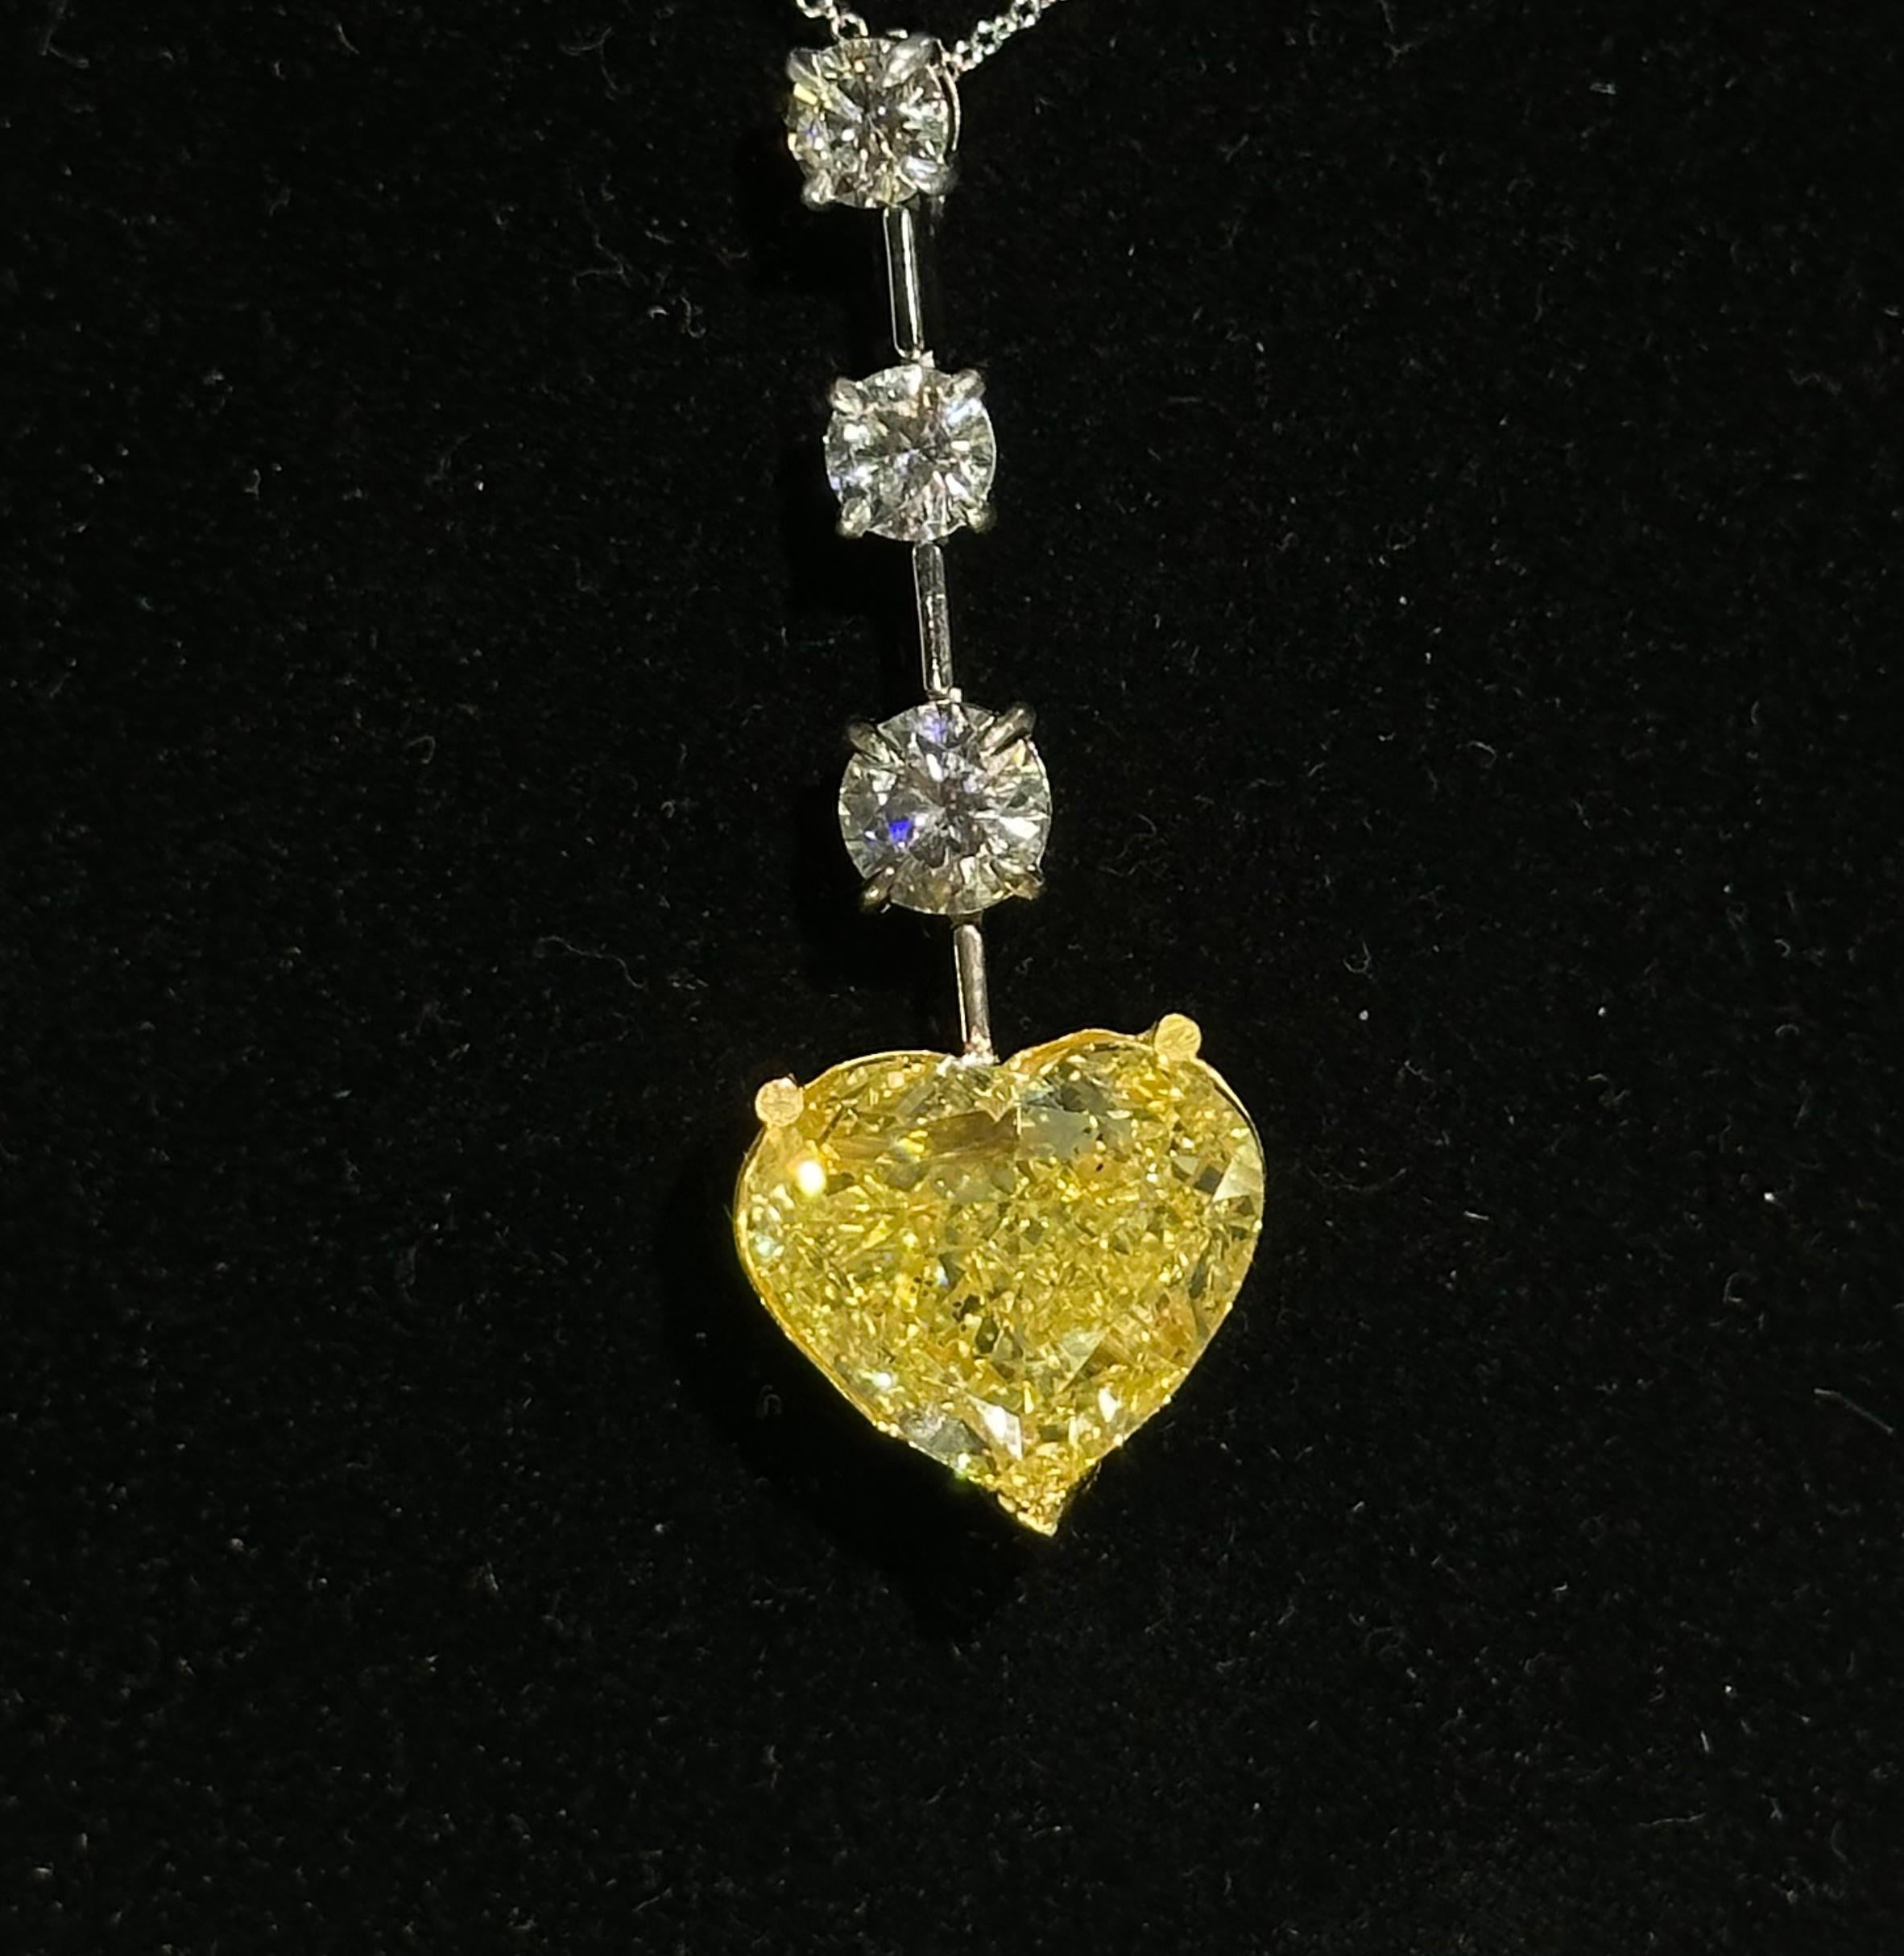 Absolutely stunning, Ladies 18 karat white and yellow gold 17.70 carat total weight GIA Certified diamond necklace features a whooping 14.04 carat natural fancy yellow modified brilliant cut heart shaped diamond in the center. The very large heart